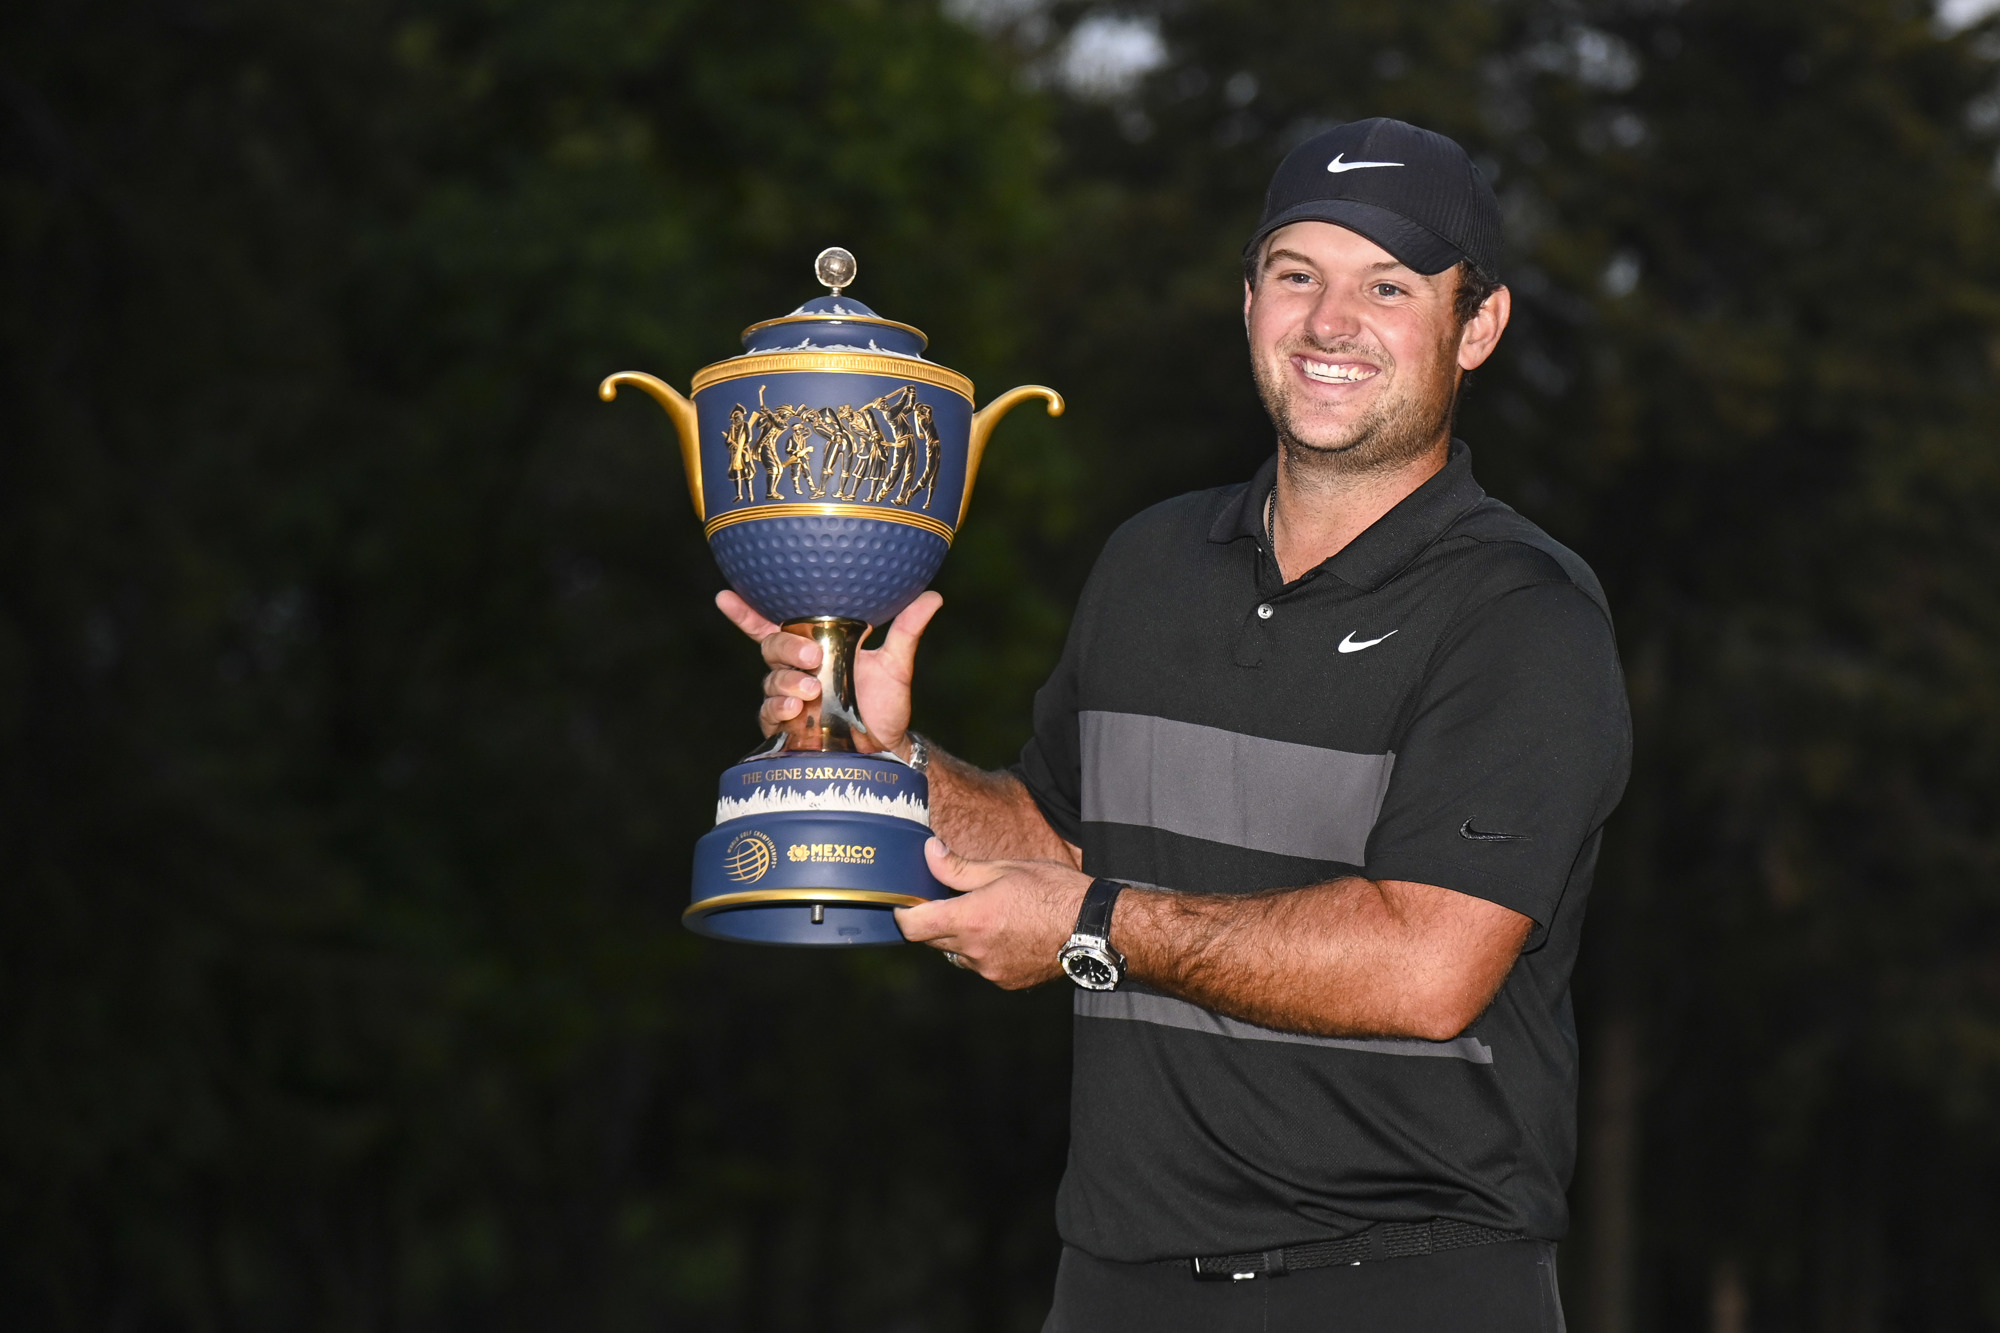 Patrick Reed won the event last year. Photo courtesy Getty / PGA TOUR.